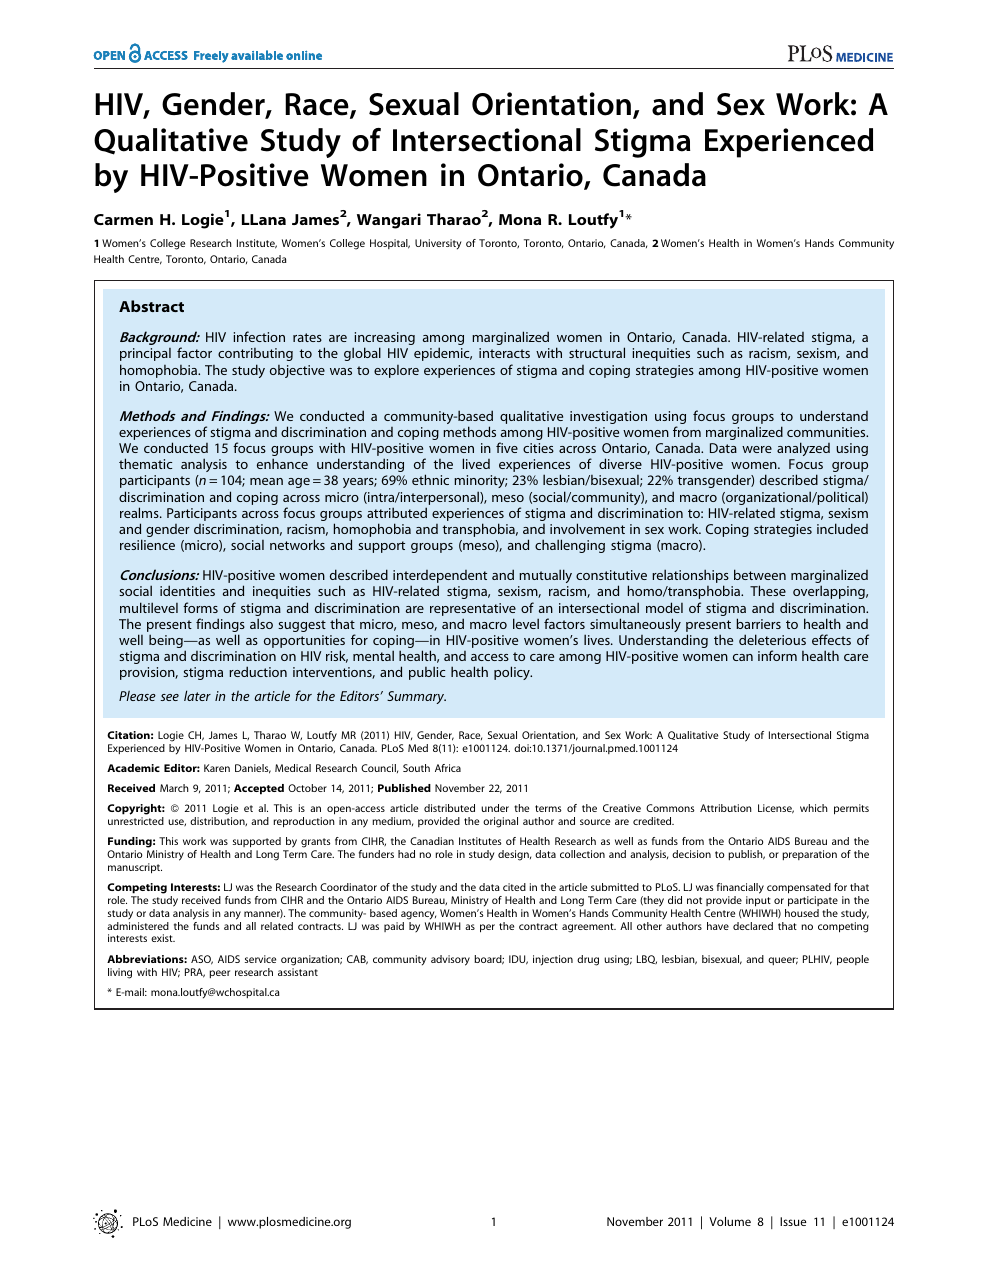 HIV, Gender, Race, Sexual Orientation, and Sex Work A Qualitative Study of Intersectional Stigma Experienced by HIV-Positive Women in Ontario, Canada  image